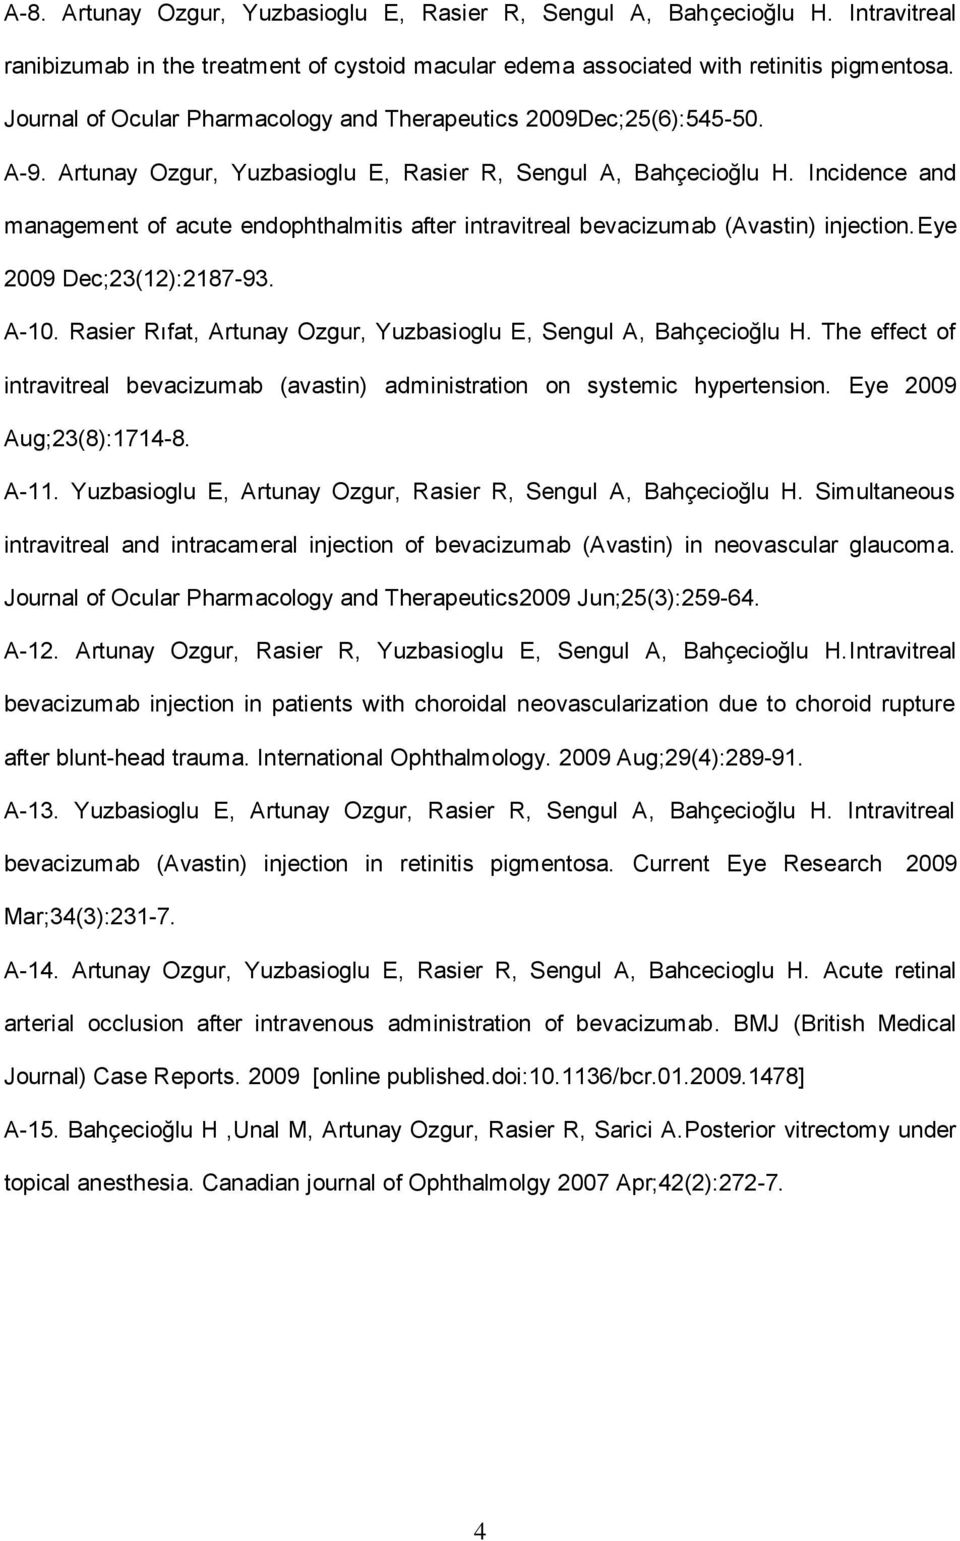 Incidence and management of acute endophthalmitis after intravitreal bevacizumab (Avastin) injection.eye 2009 Dec;23(12):2187-93. A-10.